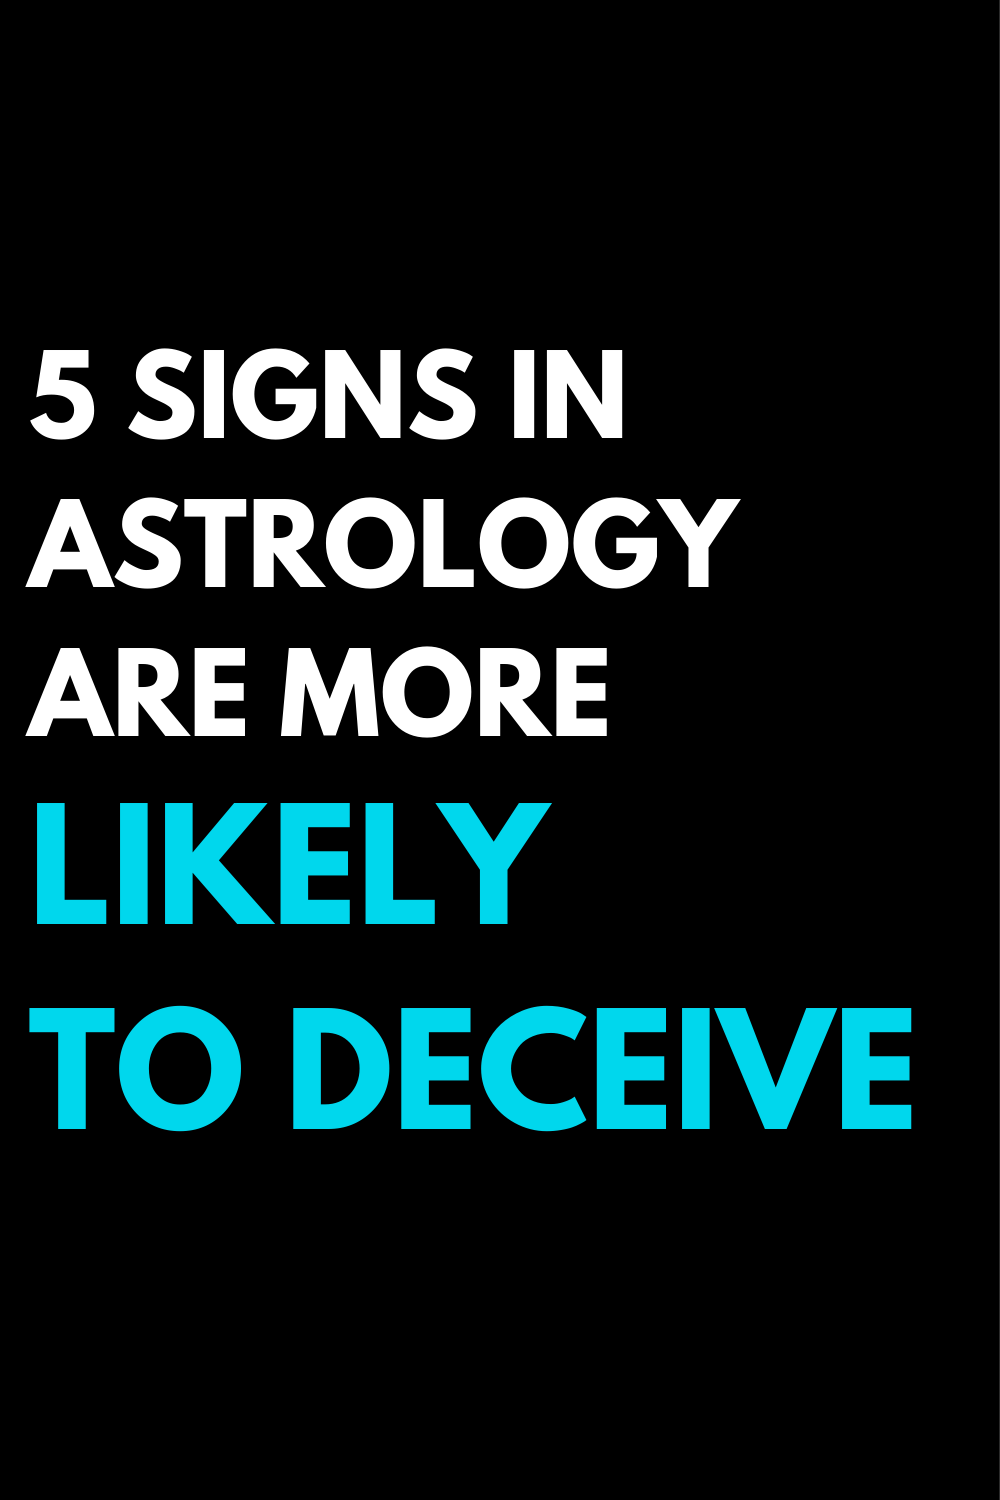 5 signs in astrology are more likely to deceive